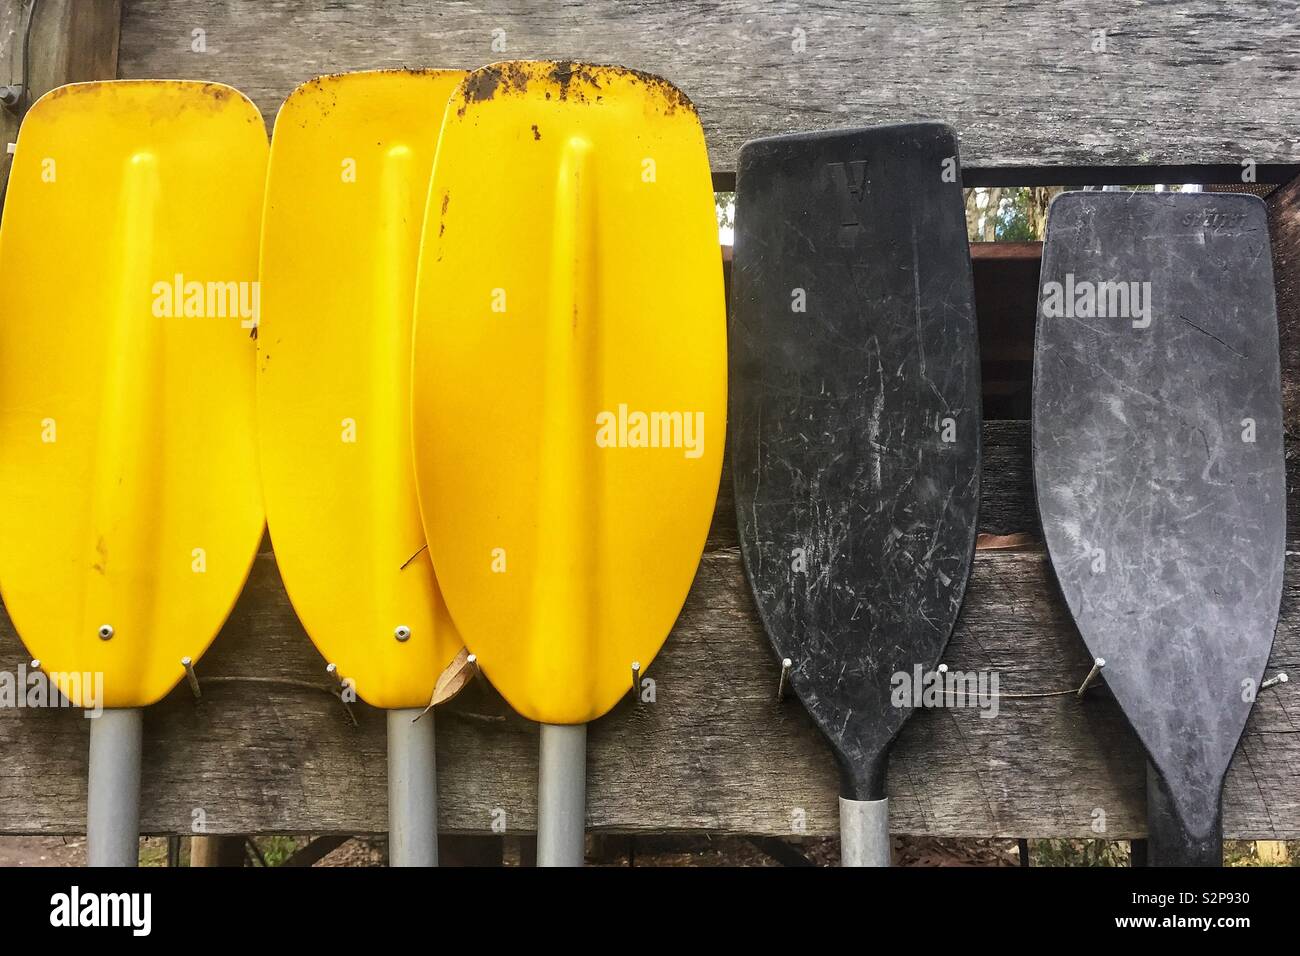 Close up of a group of yellow and black canoe paddle blades against wooden fence. Plastic boat paddles or oars, background Stock Photo